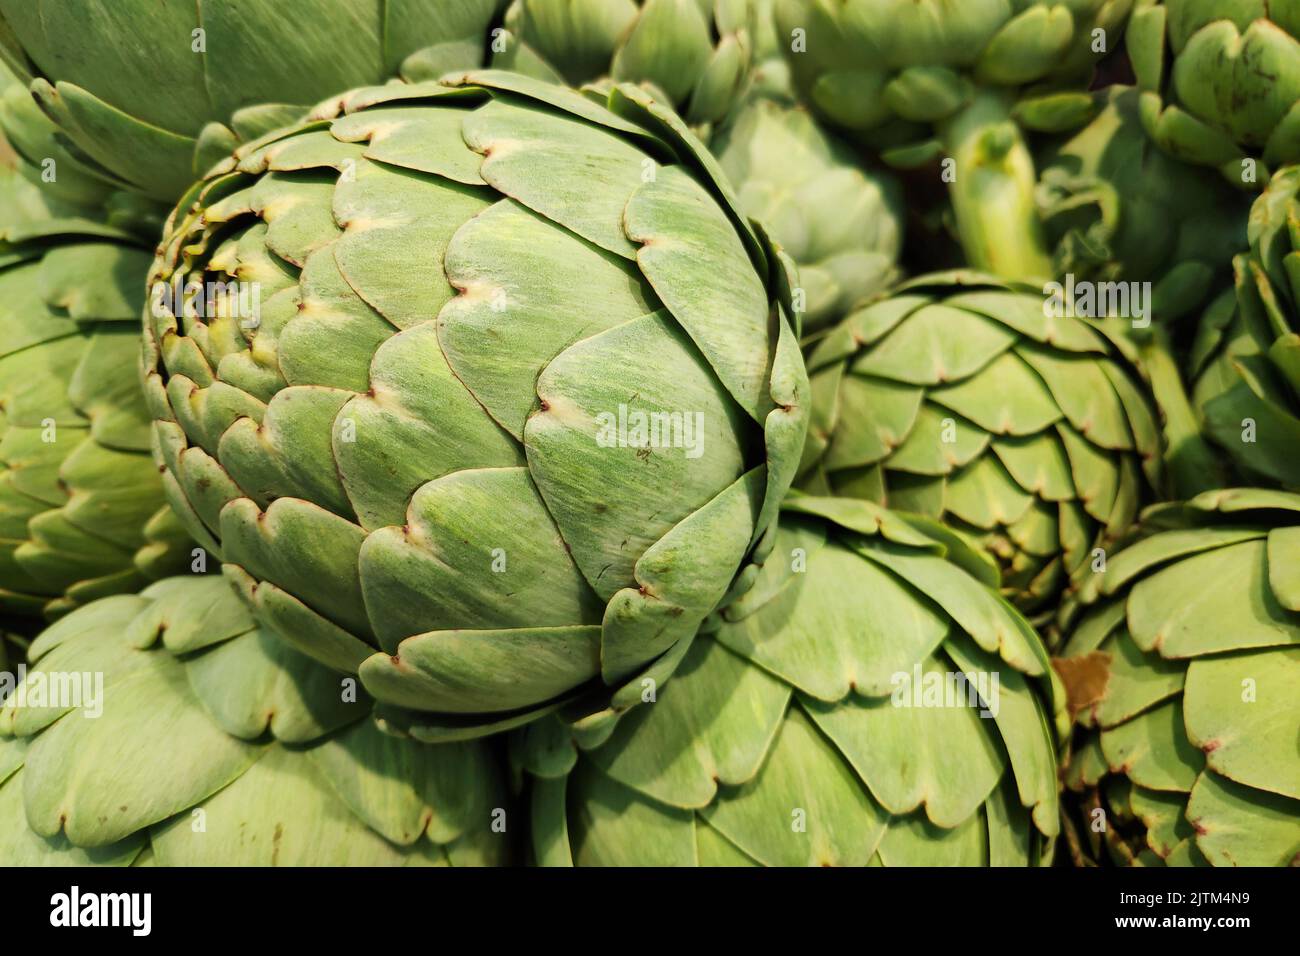 Close-up on a stack of artichokes on a market stall. Stock Photo